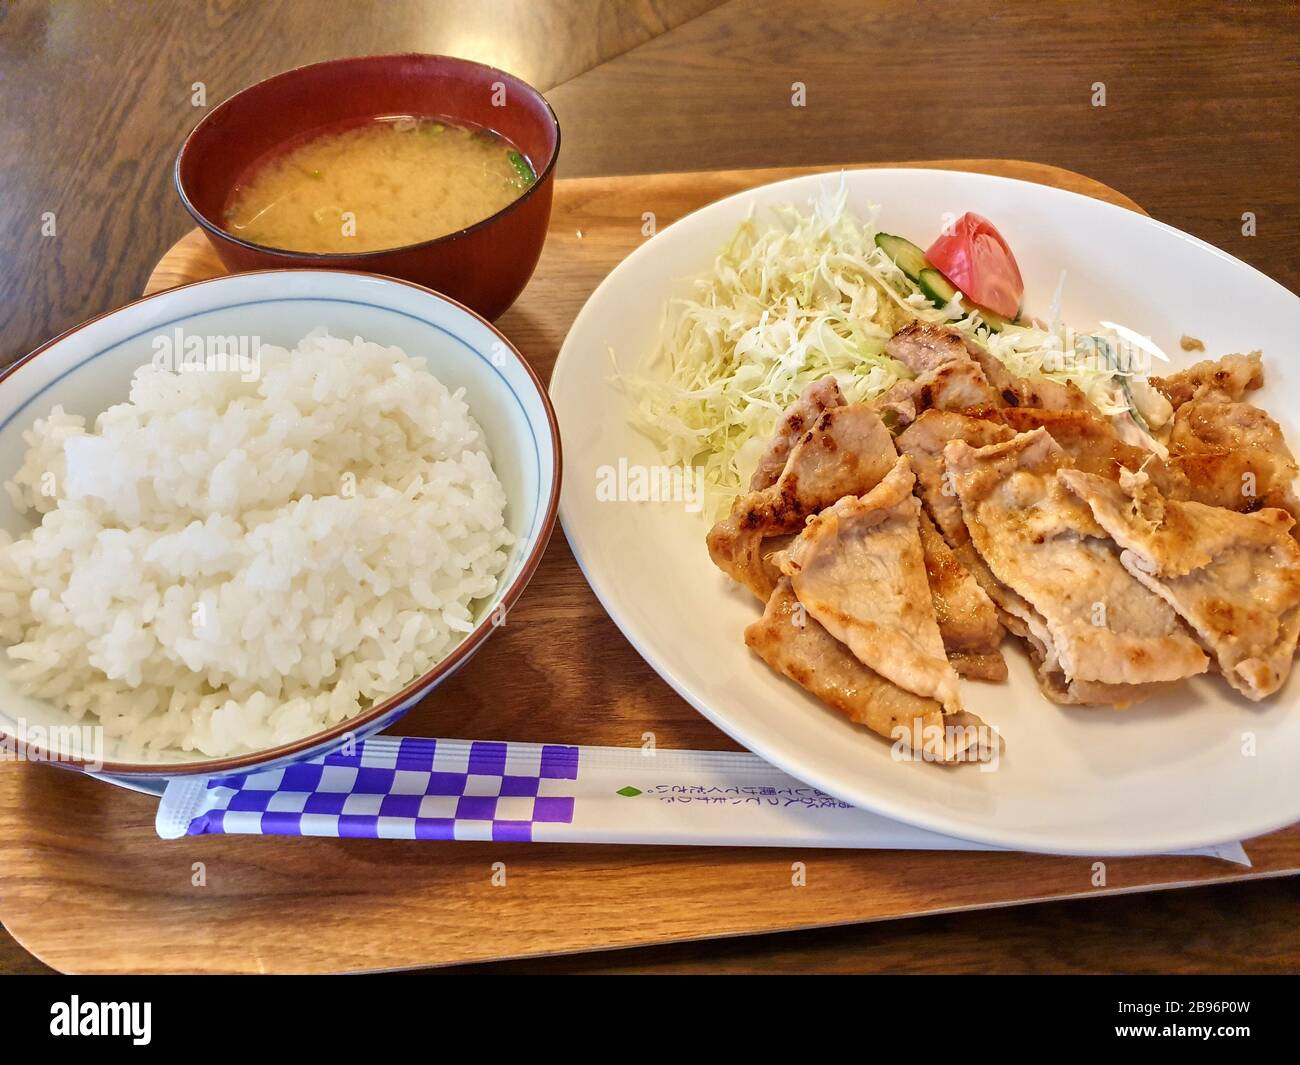 Boiled rice with pork and vegetables Stock Photo